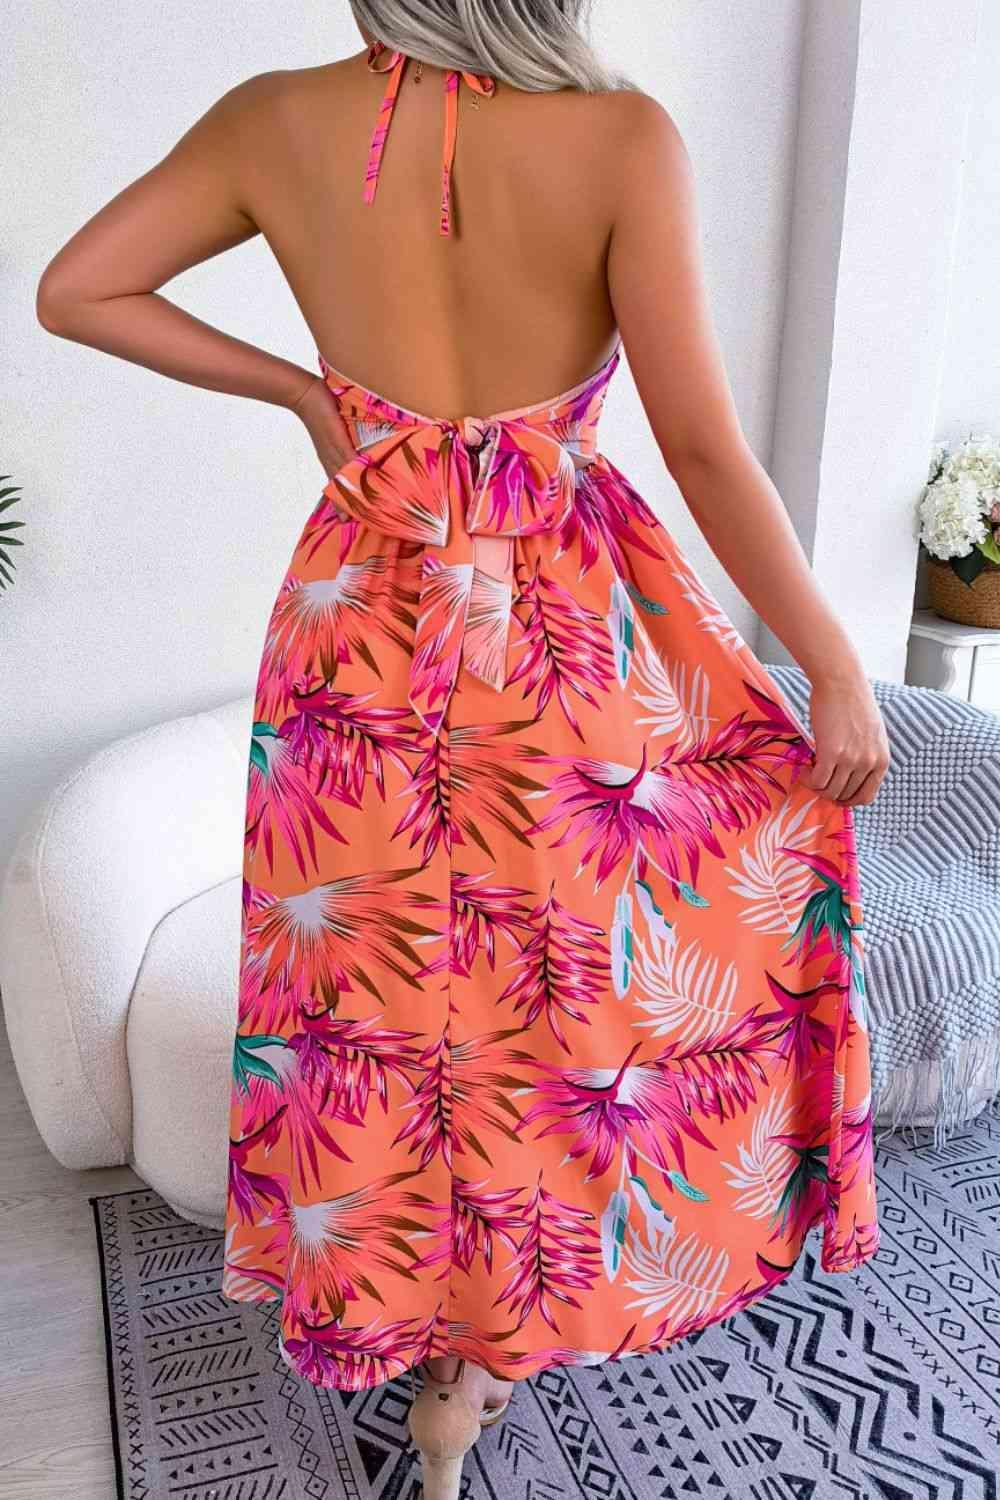 the back of a woman wearing a pink tropical print dress